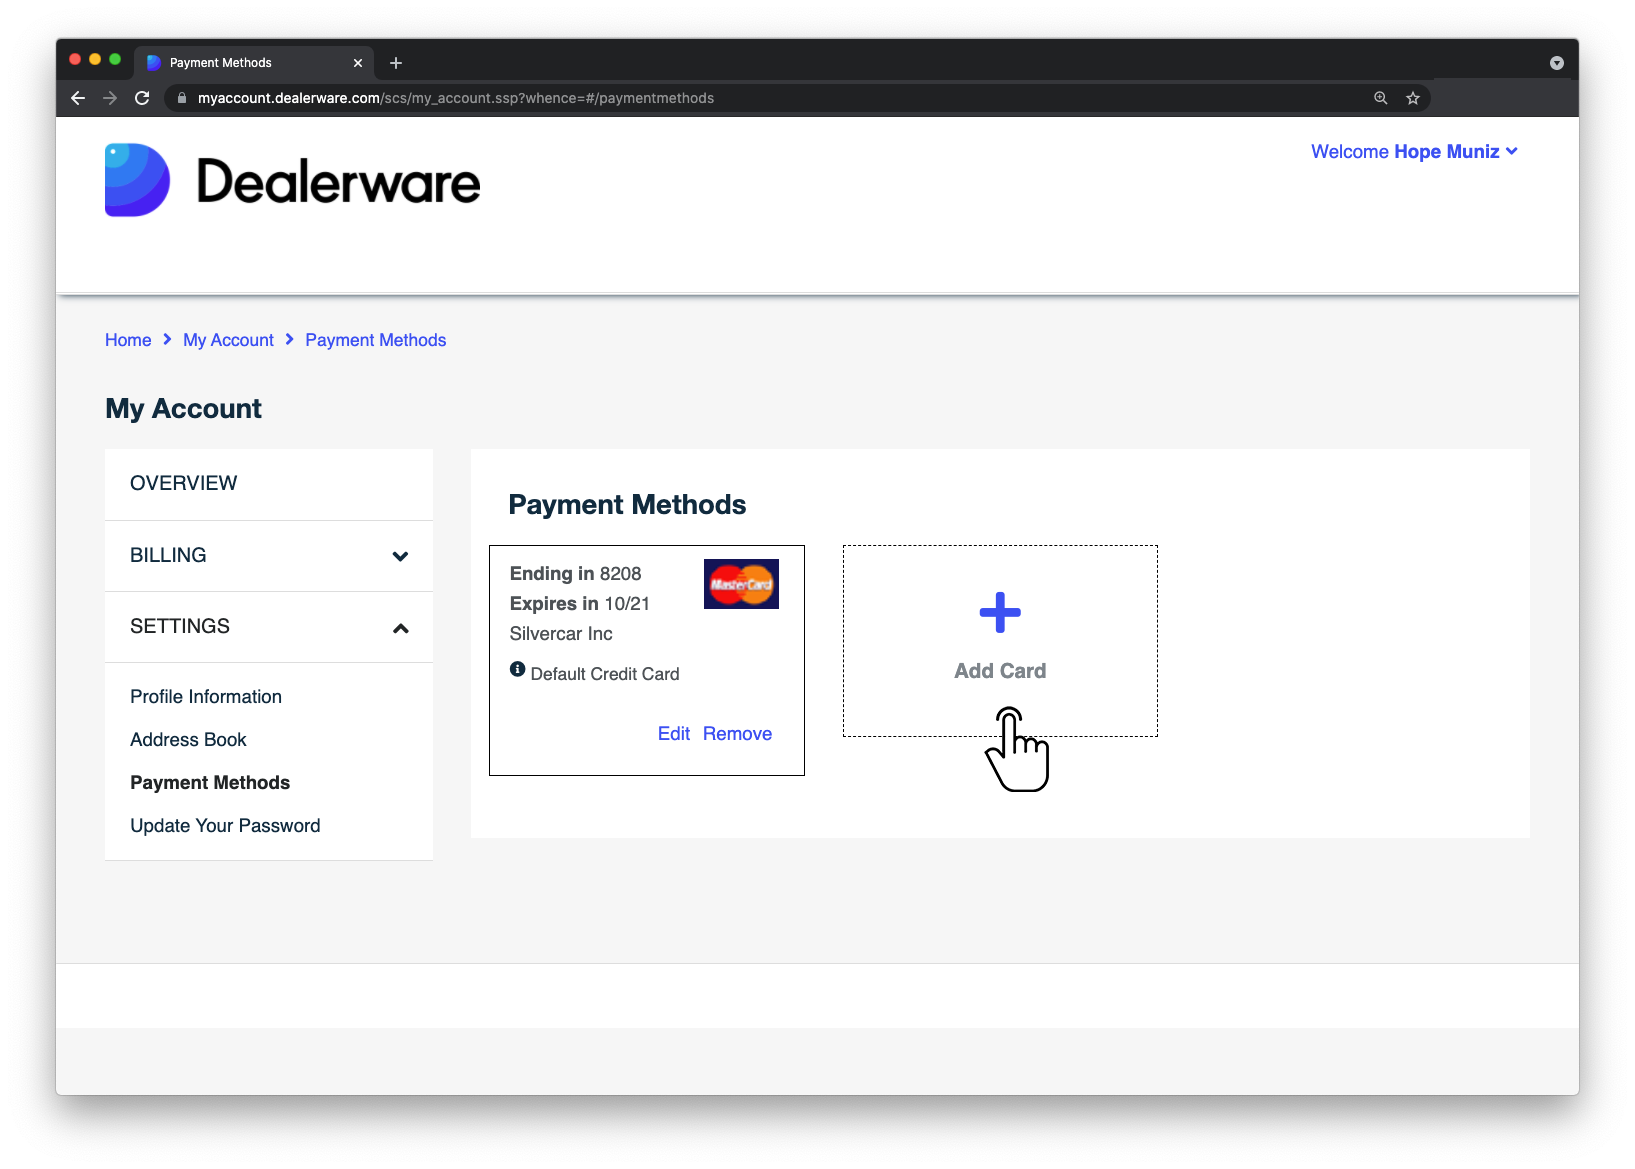 Image 3: Dealerware MyAccount screen, fingertap icon positioned over Add Card area in Payment Methods screen